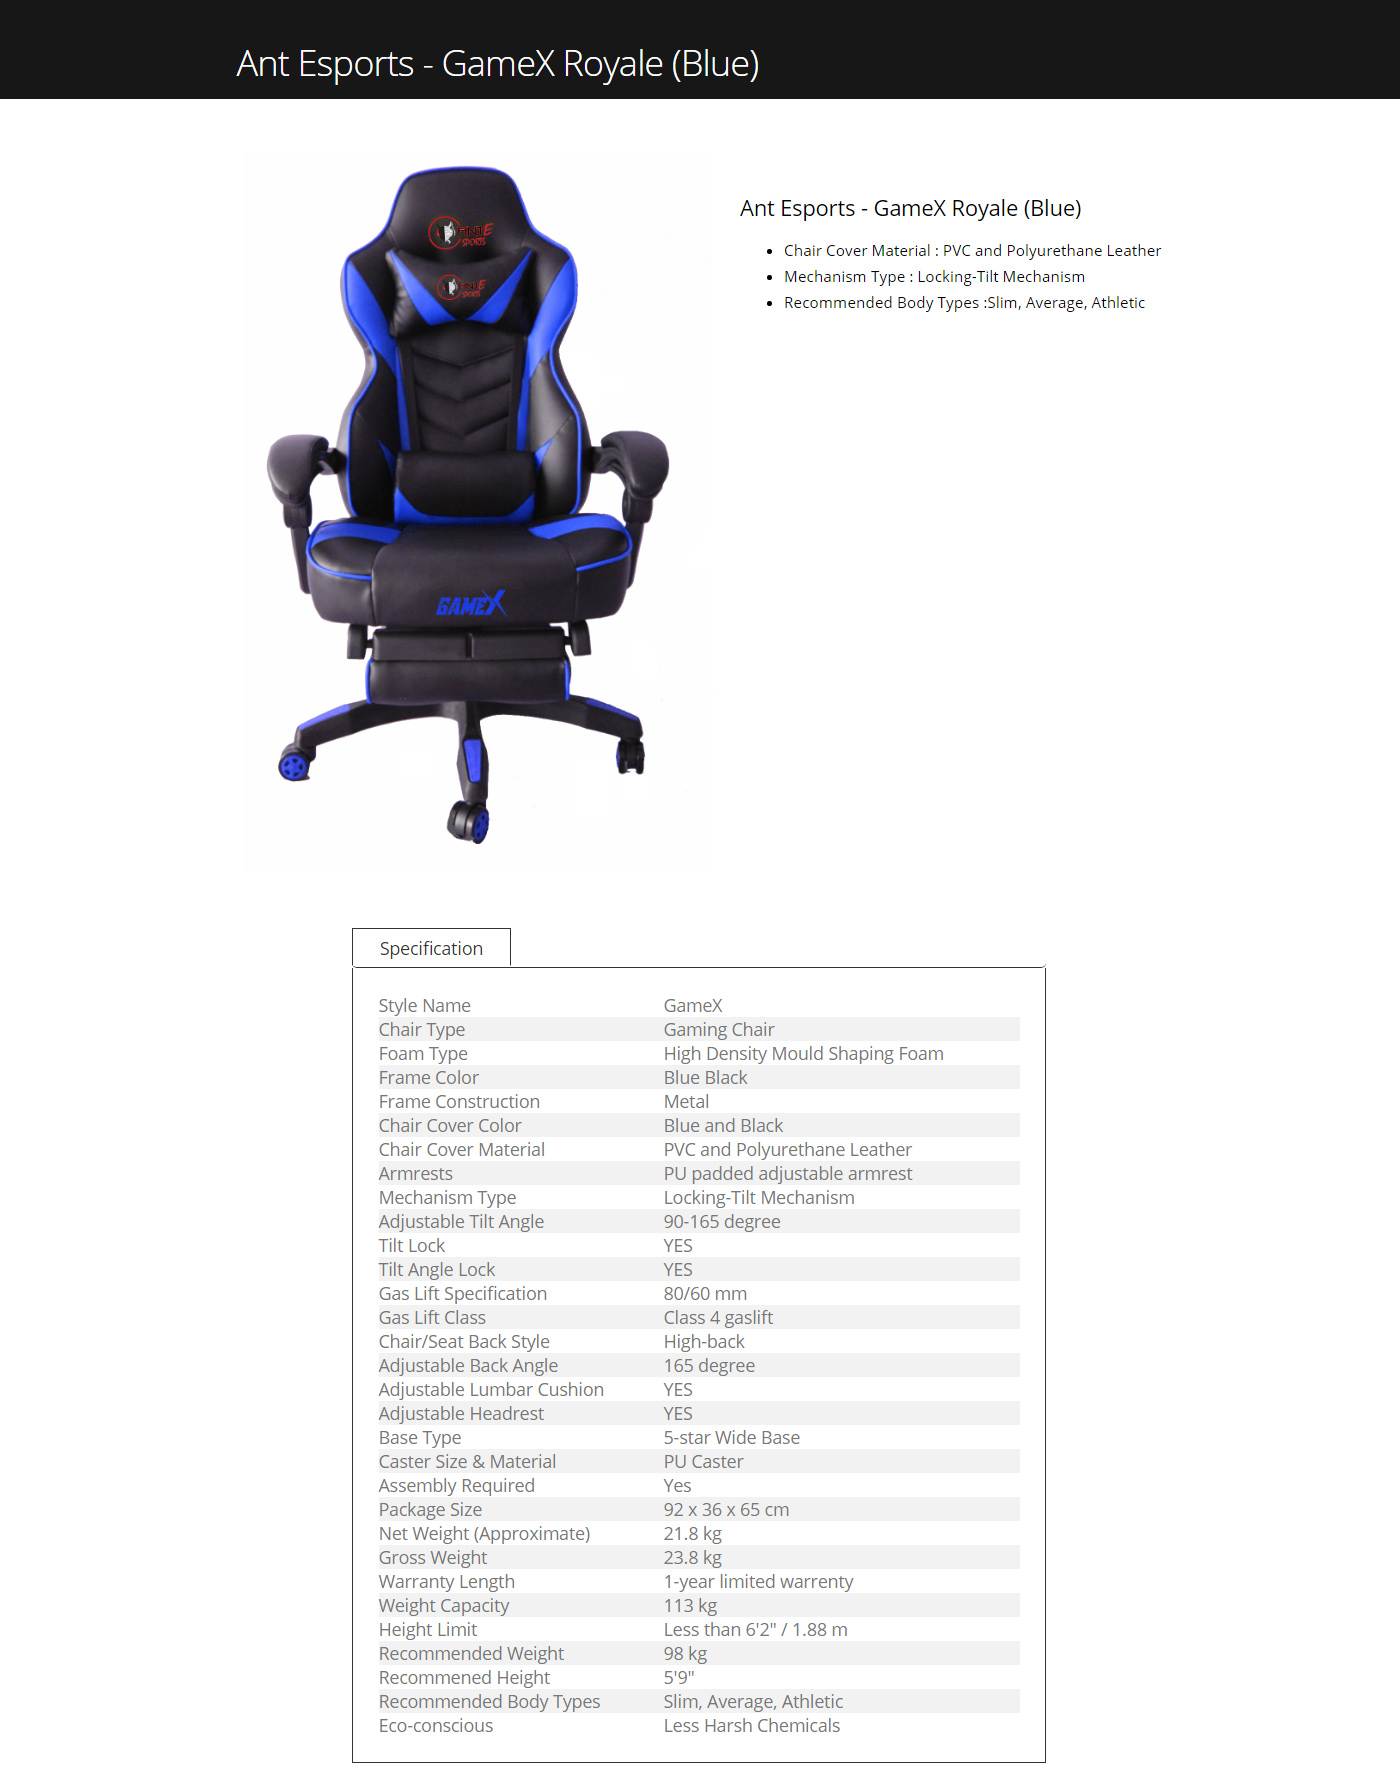  Buy Online Ant Esports GameX Royale Gaming Chair With Foot Rest - Blue